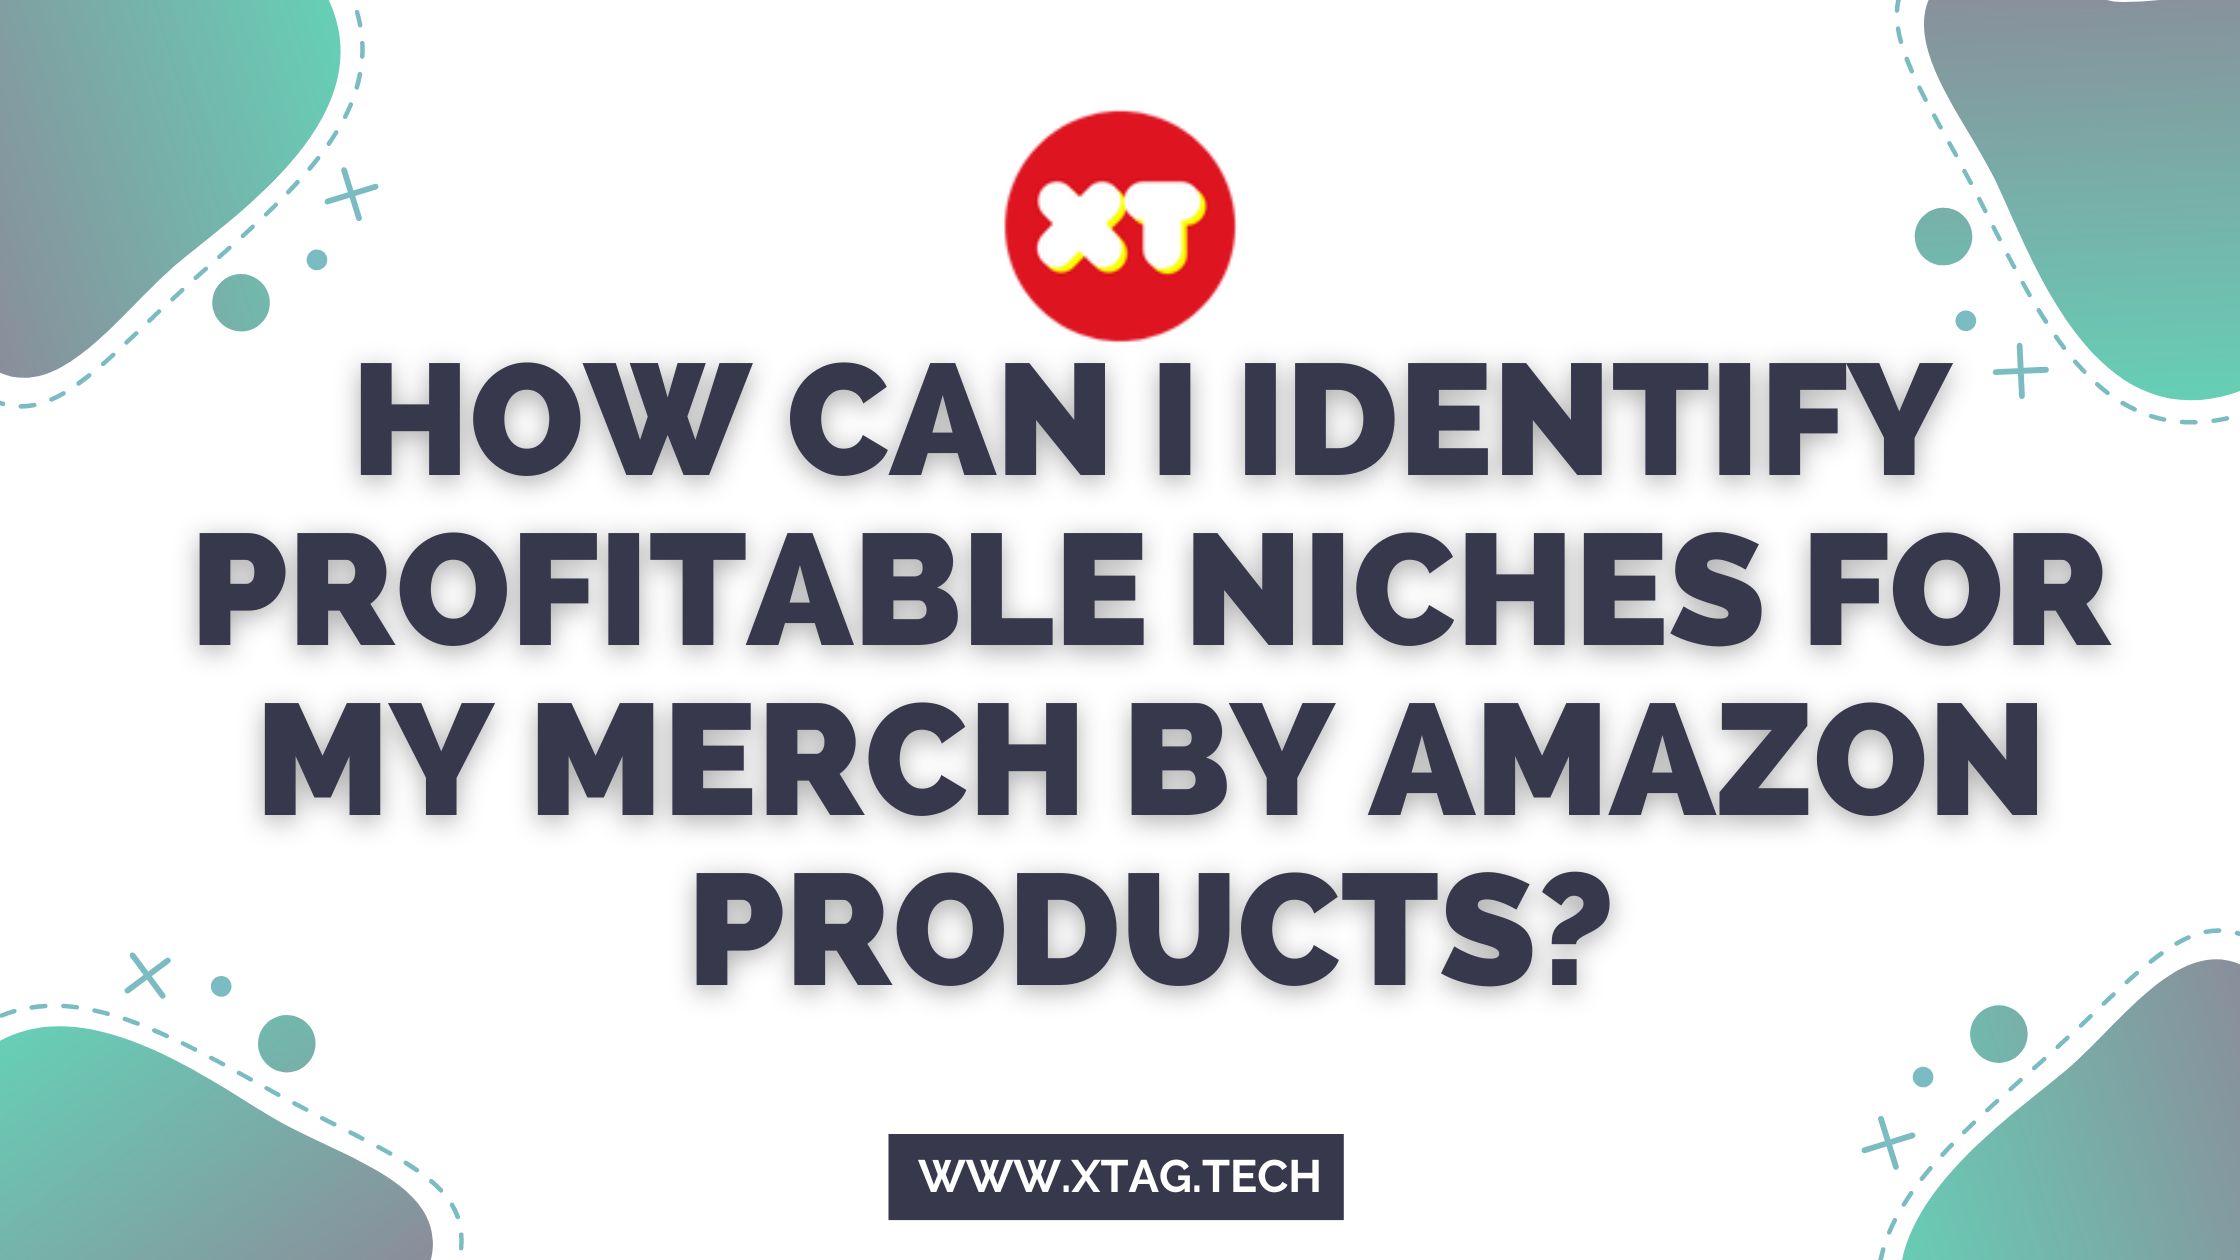 How Can I Identify Profitable Niches For My Merch By Amazon Products?